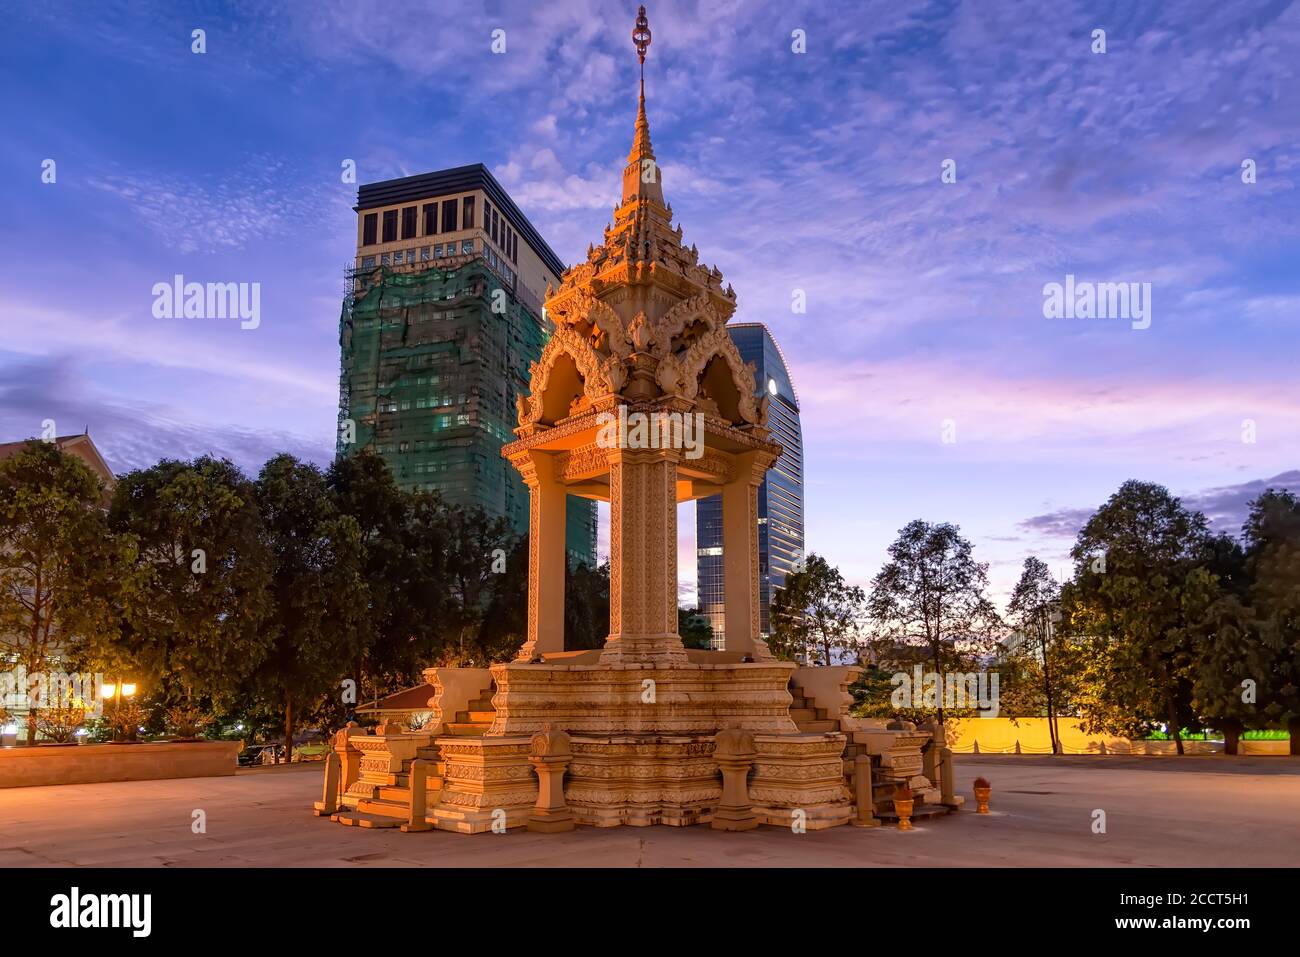 The Yeay Penh Statue near Wat Phnom in Phnom Penh, Cambodia, with high rise apartments behind Stock Photo